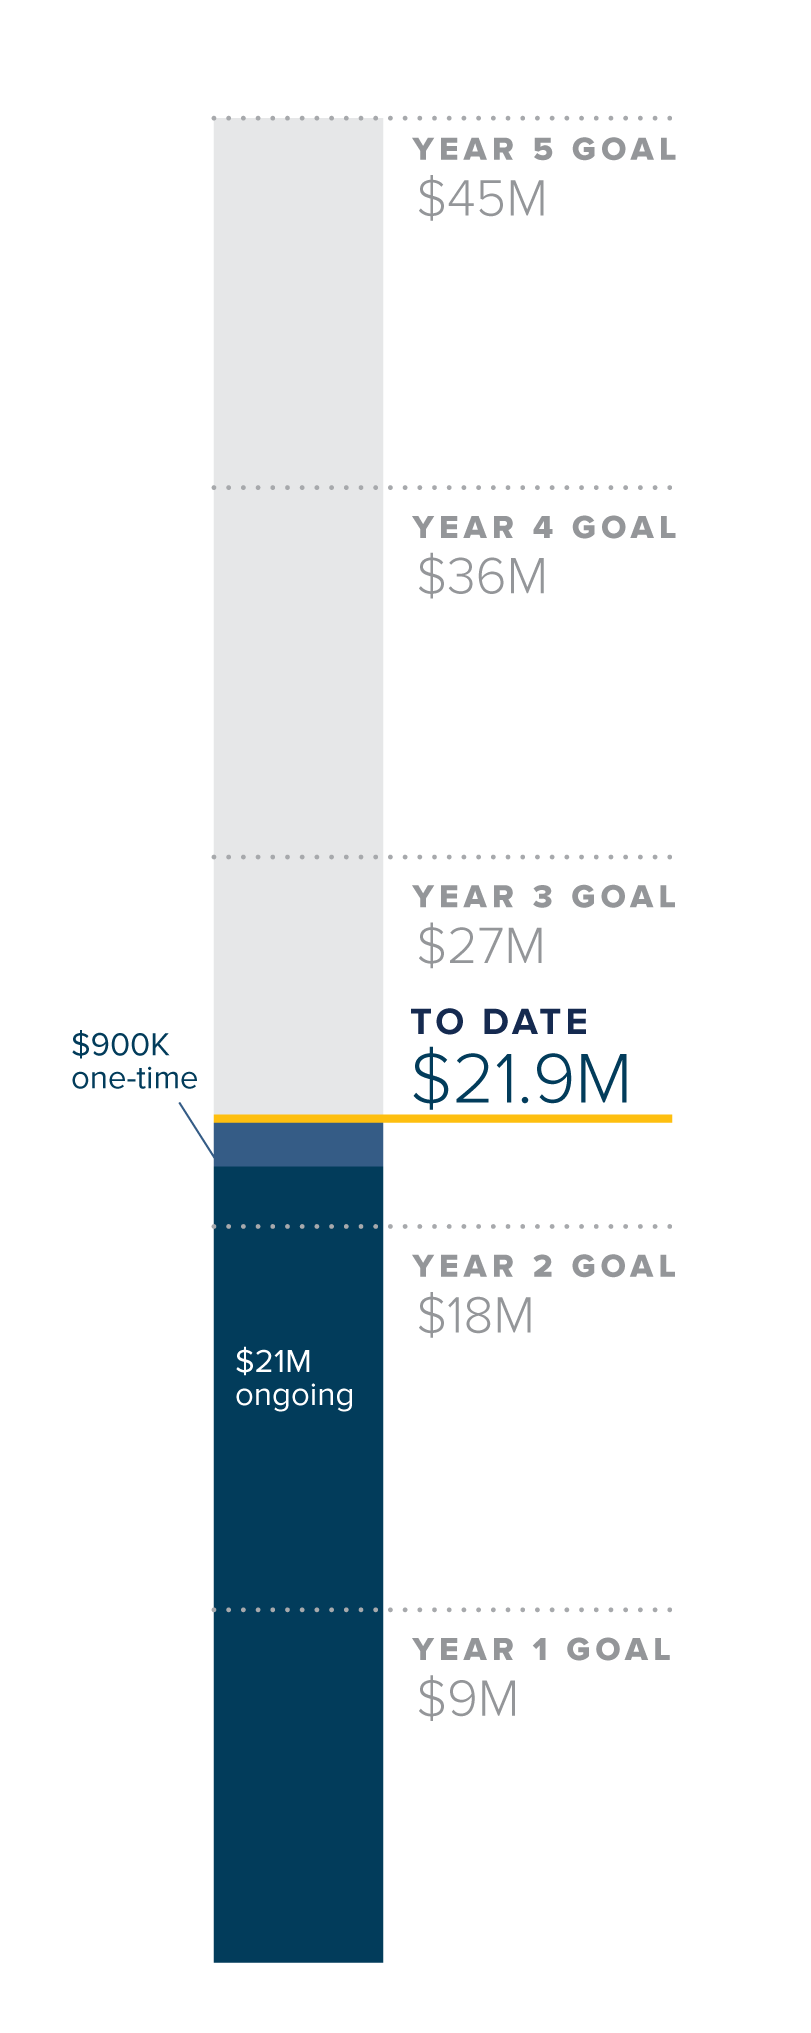 Unit Savings Target thermometer graphic. $21.9 million raised to date, of which $21 million is ongoing and $900,000 is one-time.